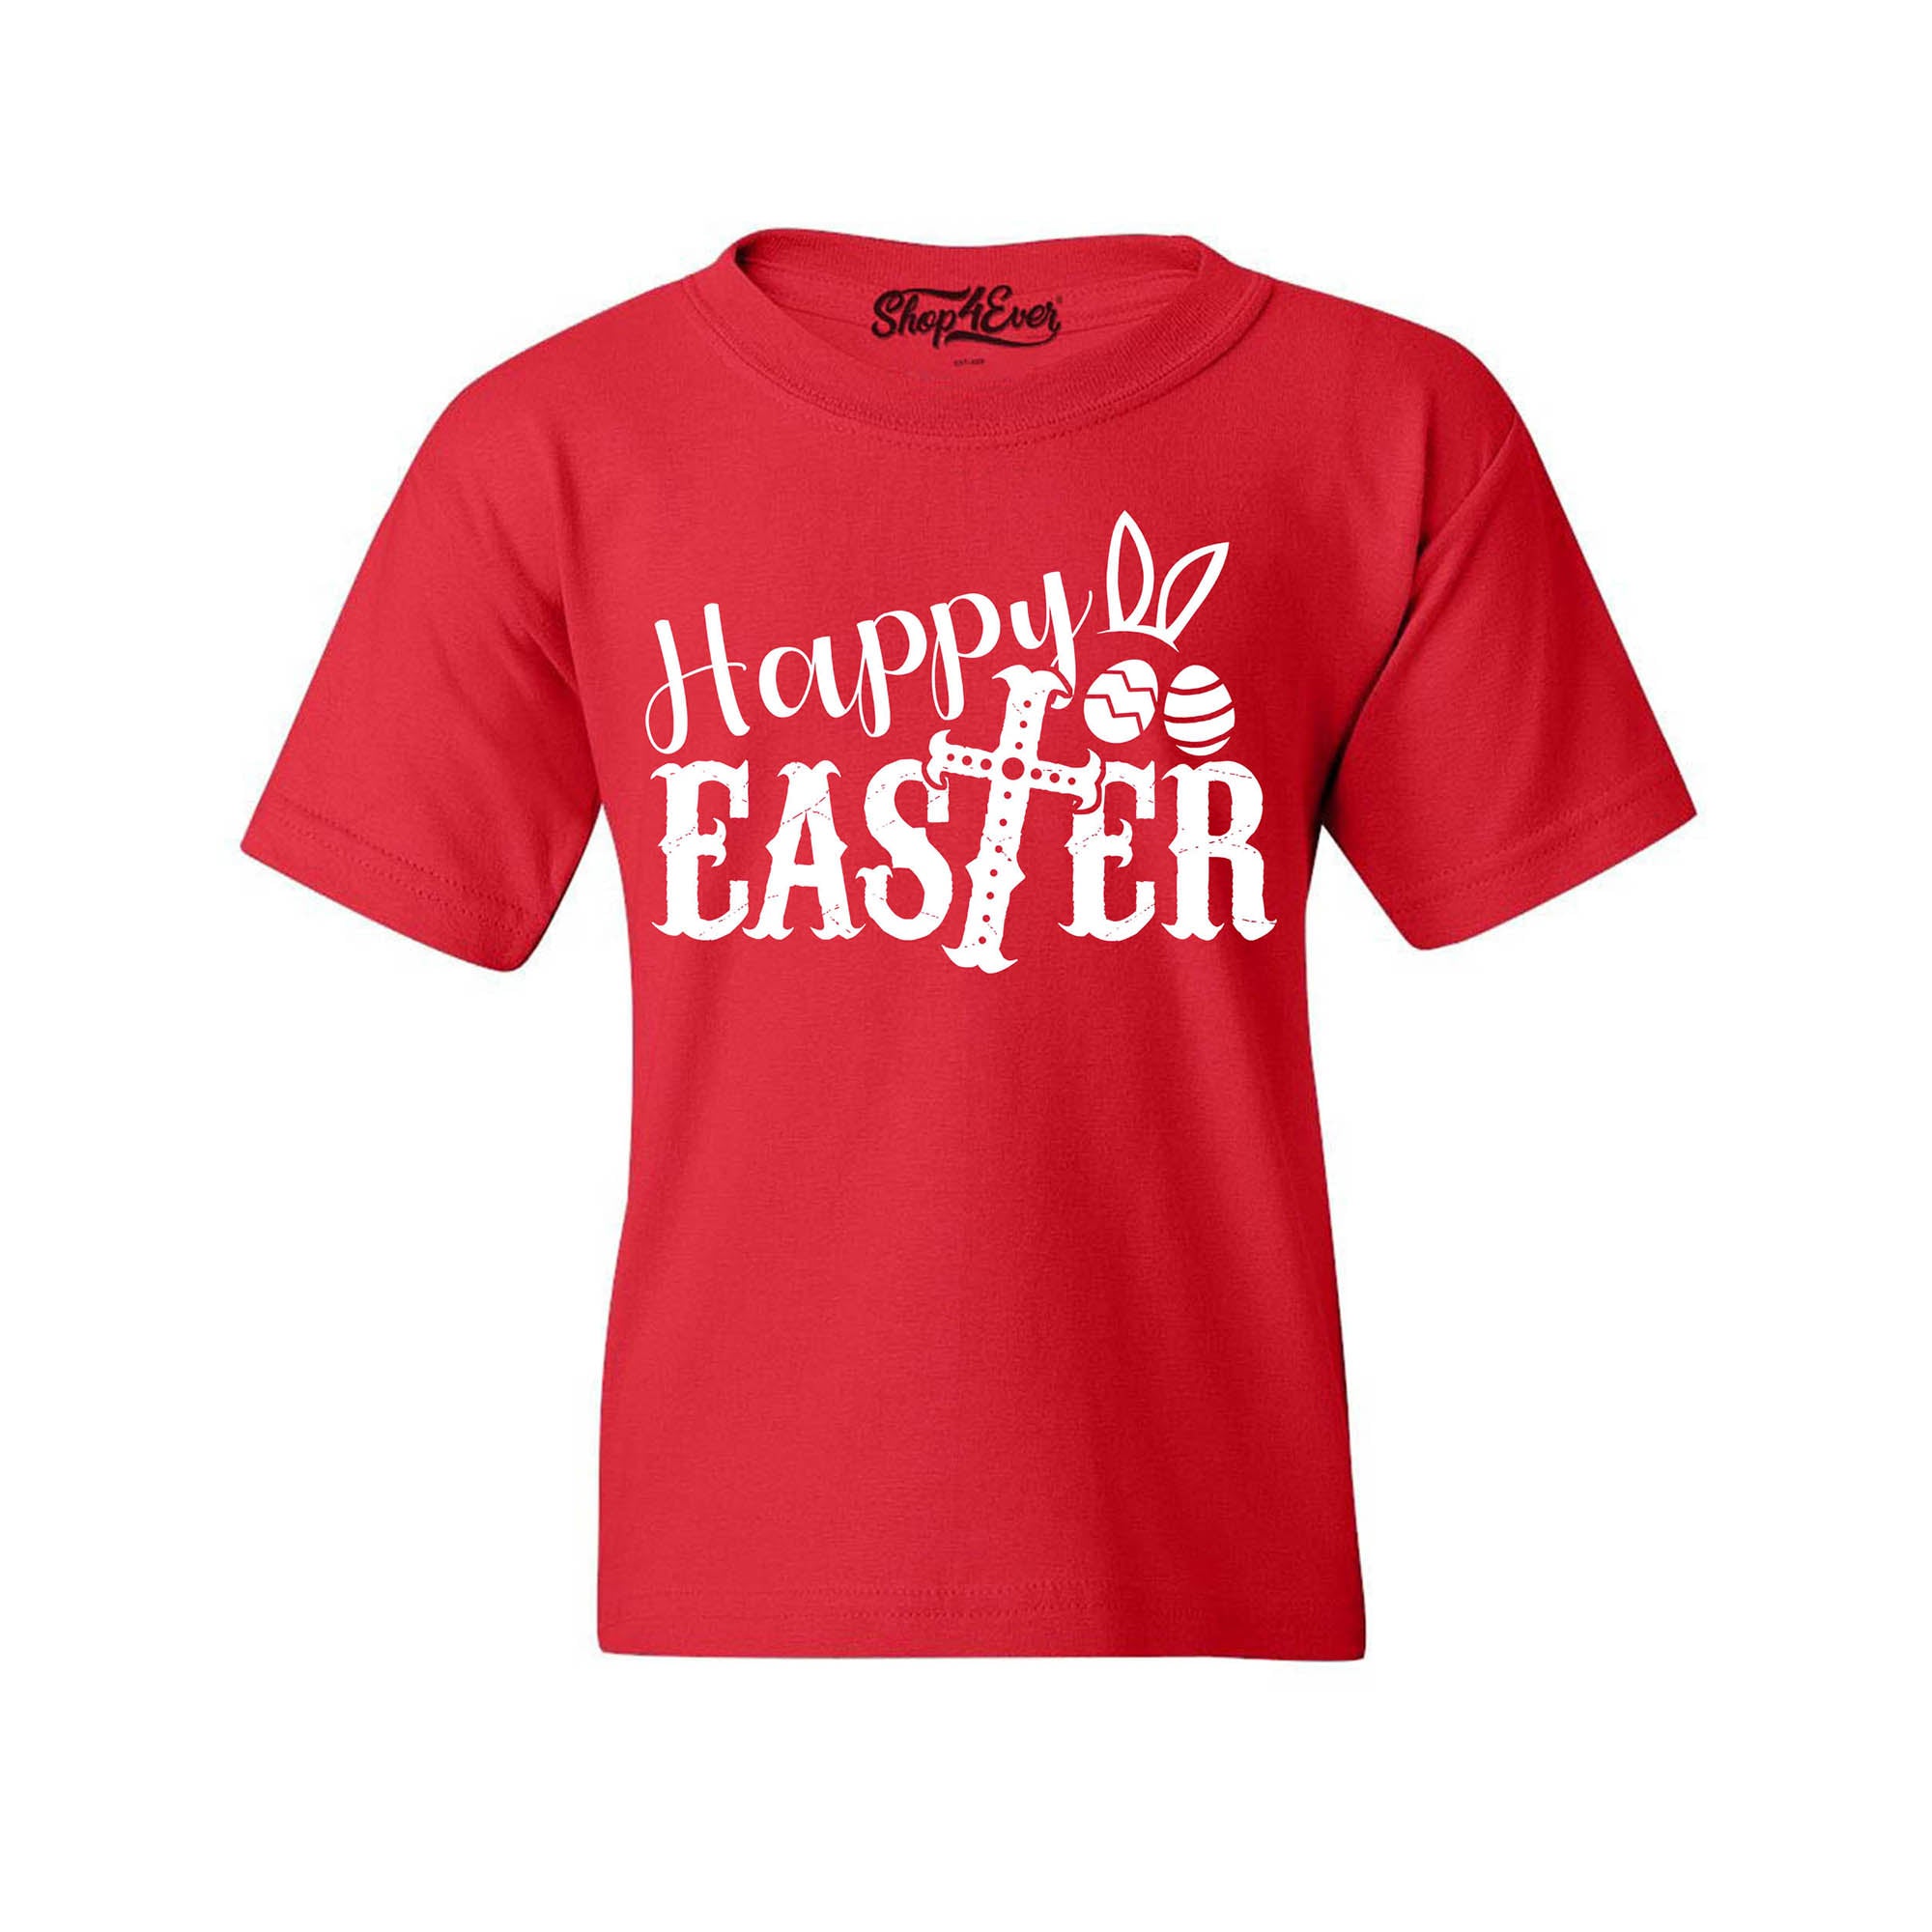 Happy Easter with Cross Youth's T-Shirt Spring Child Kids Tee